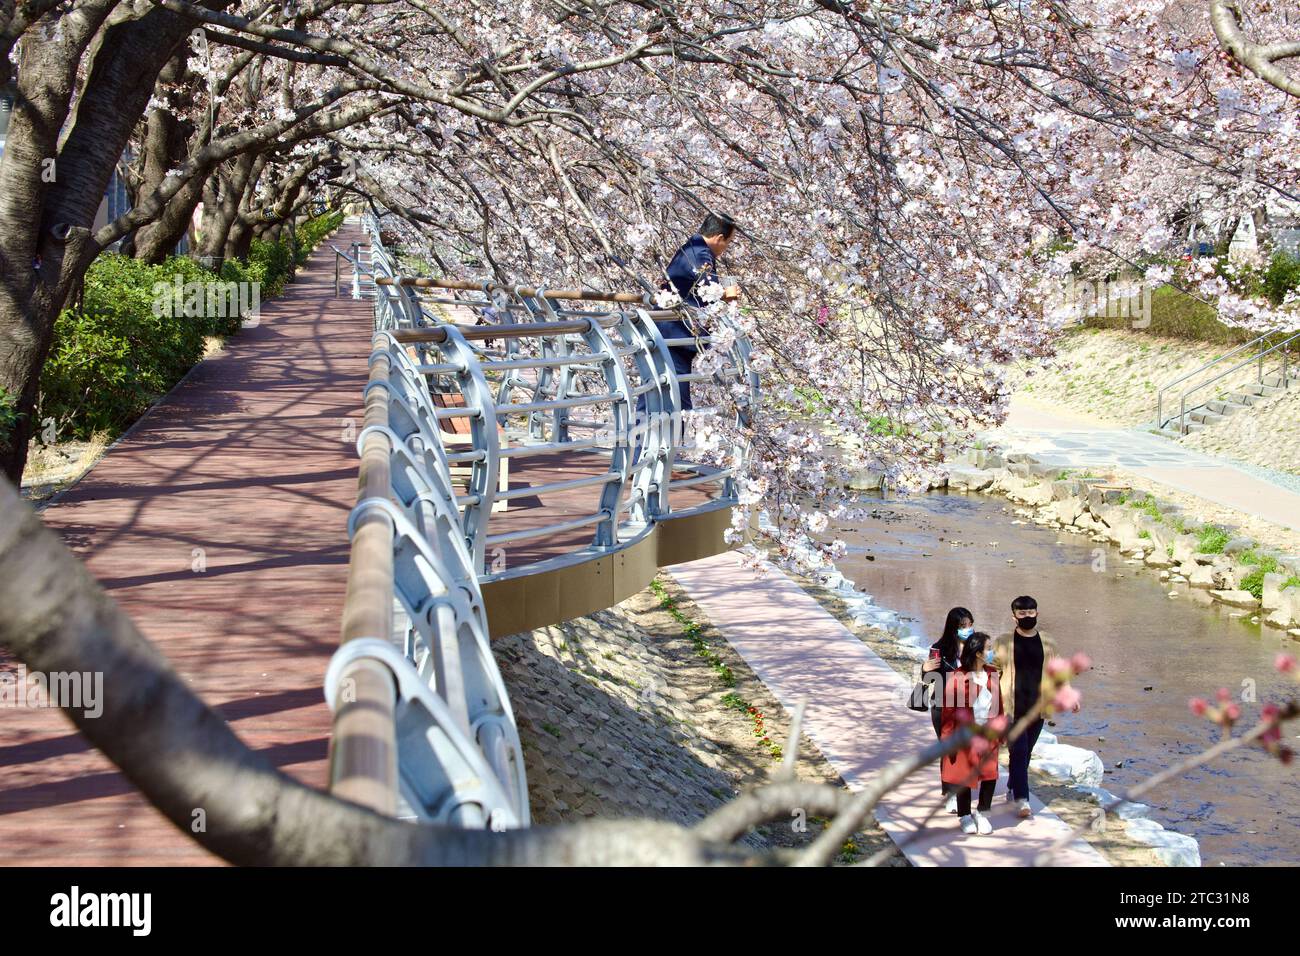 Cherry blossoms create a stunning canopy over a raised walkway, with people enjoying the tranquil setting both on the walkway above and on the stream Stock Photo